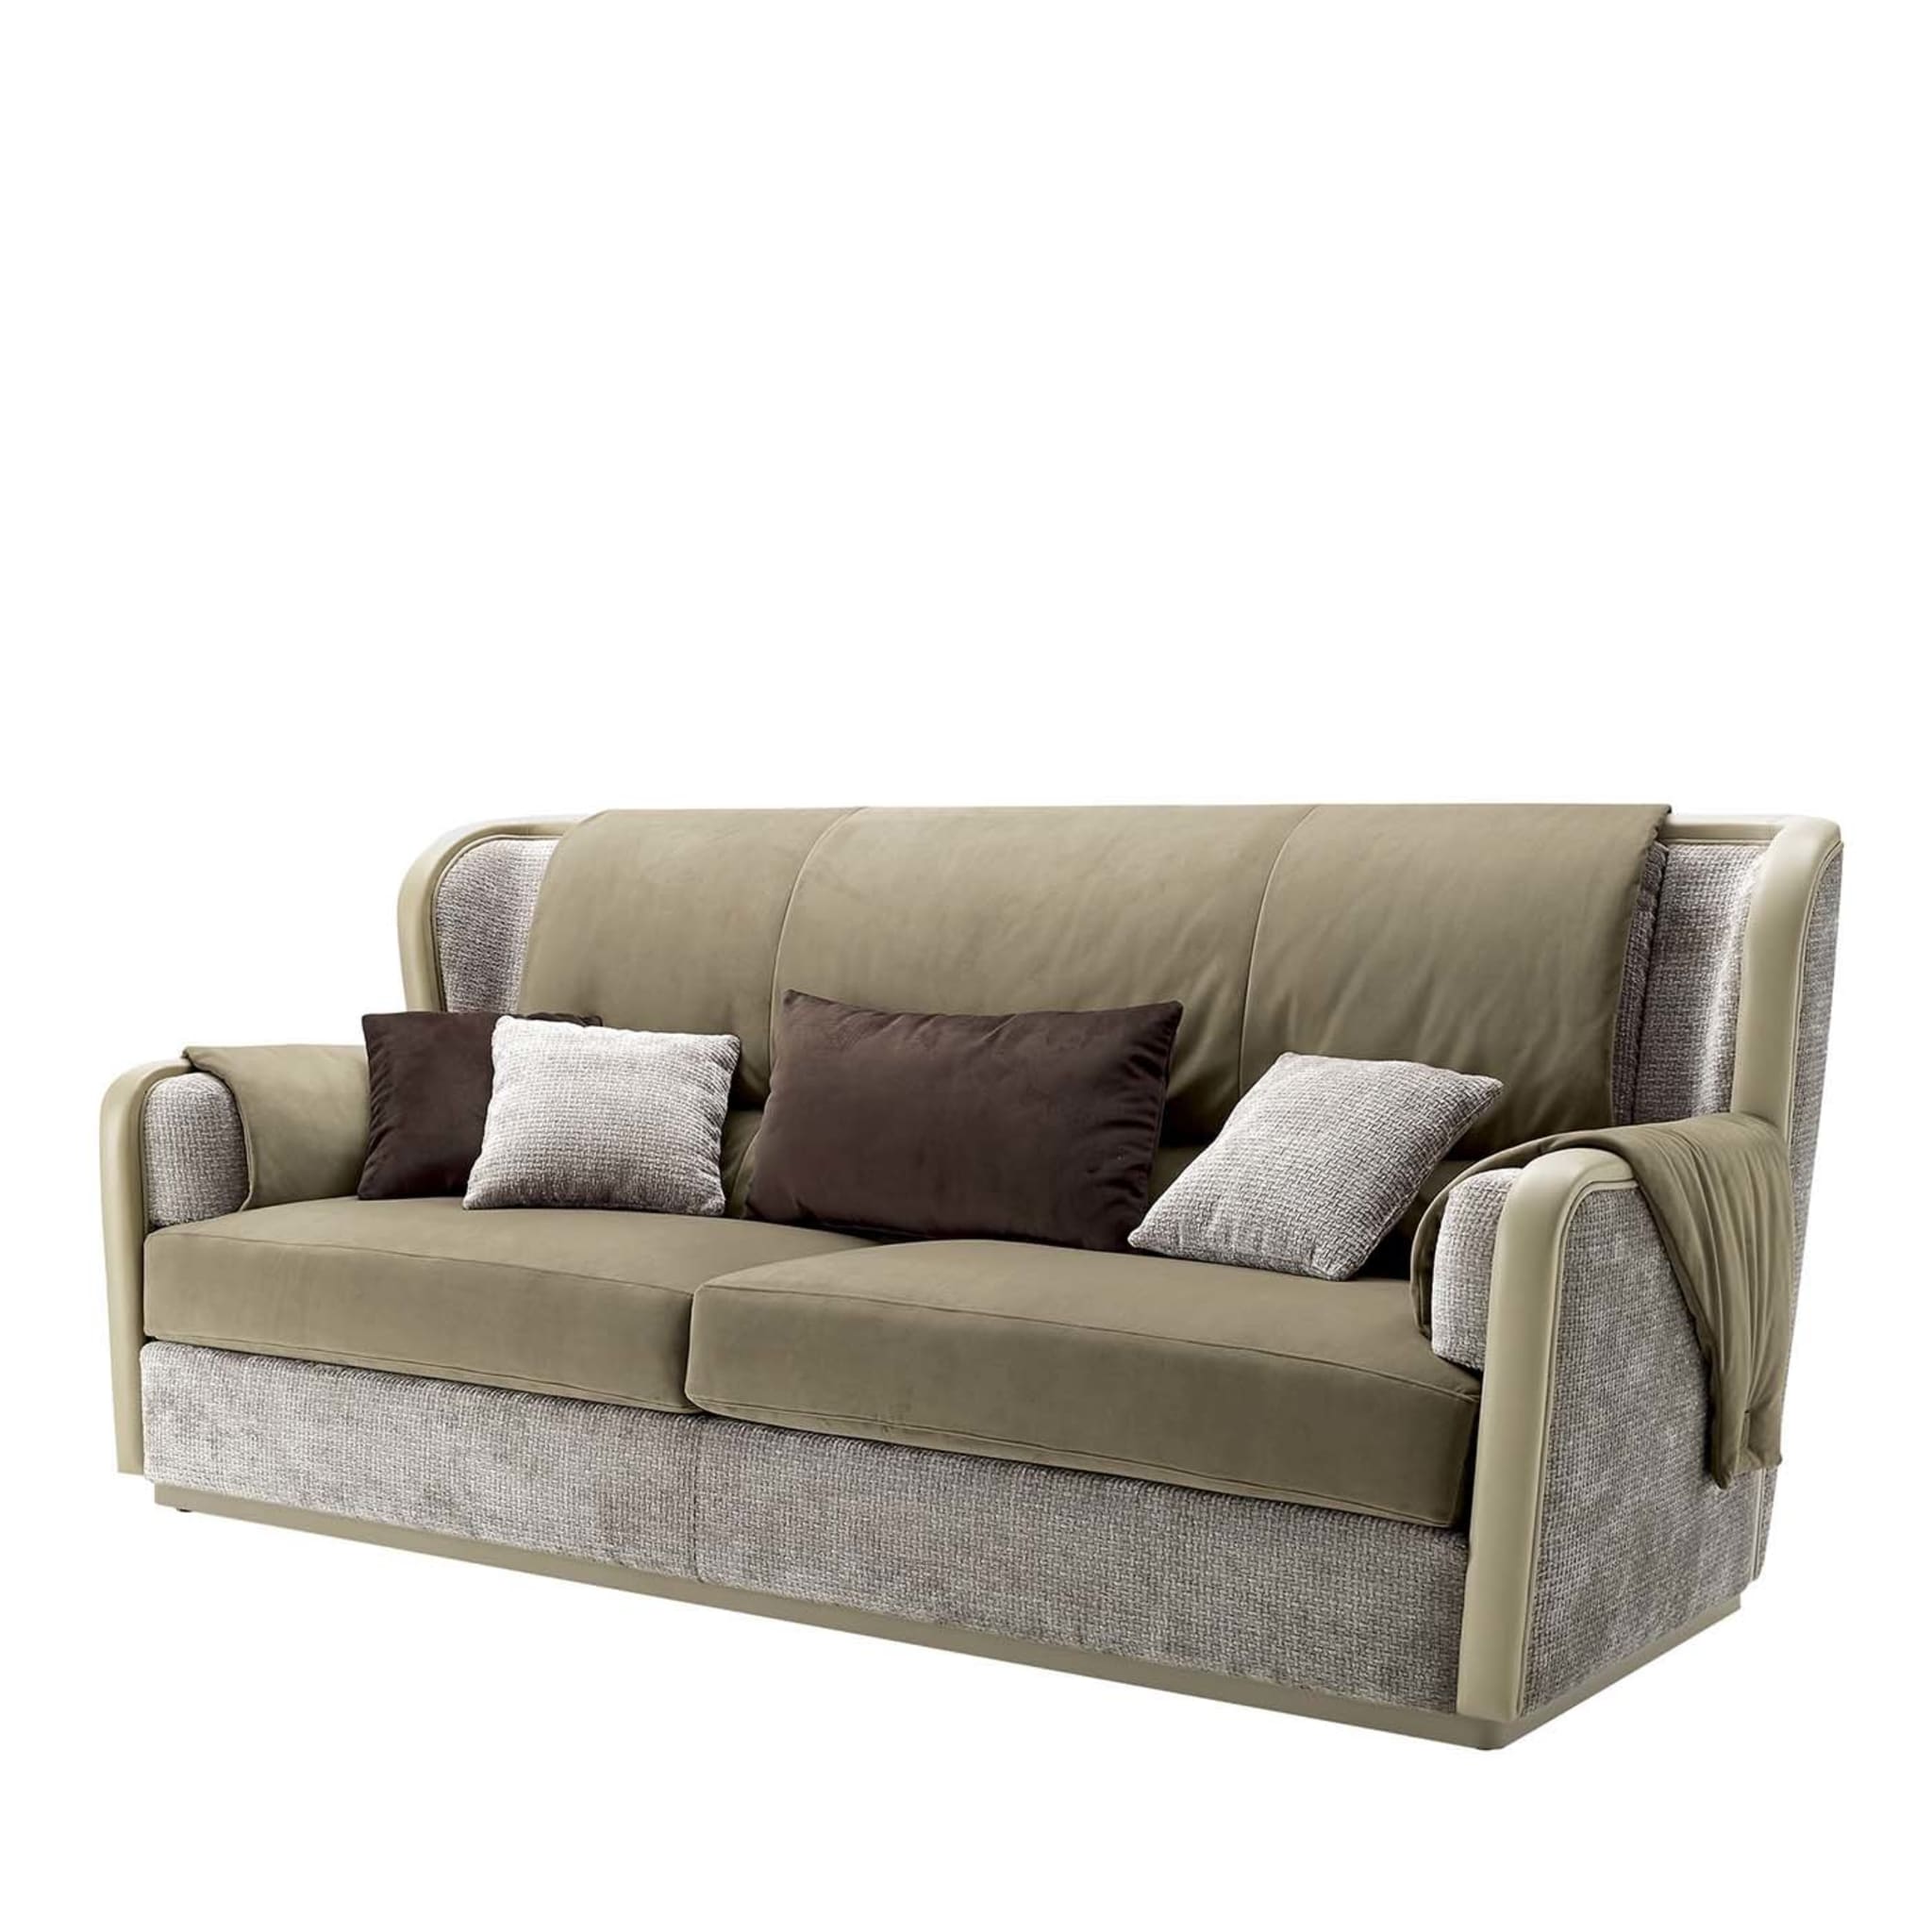 Beige Leather and Velvet 3-Seater Sofa - Main view